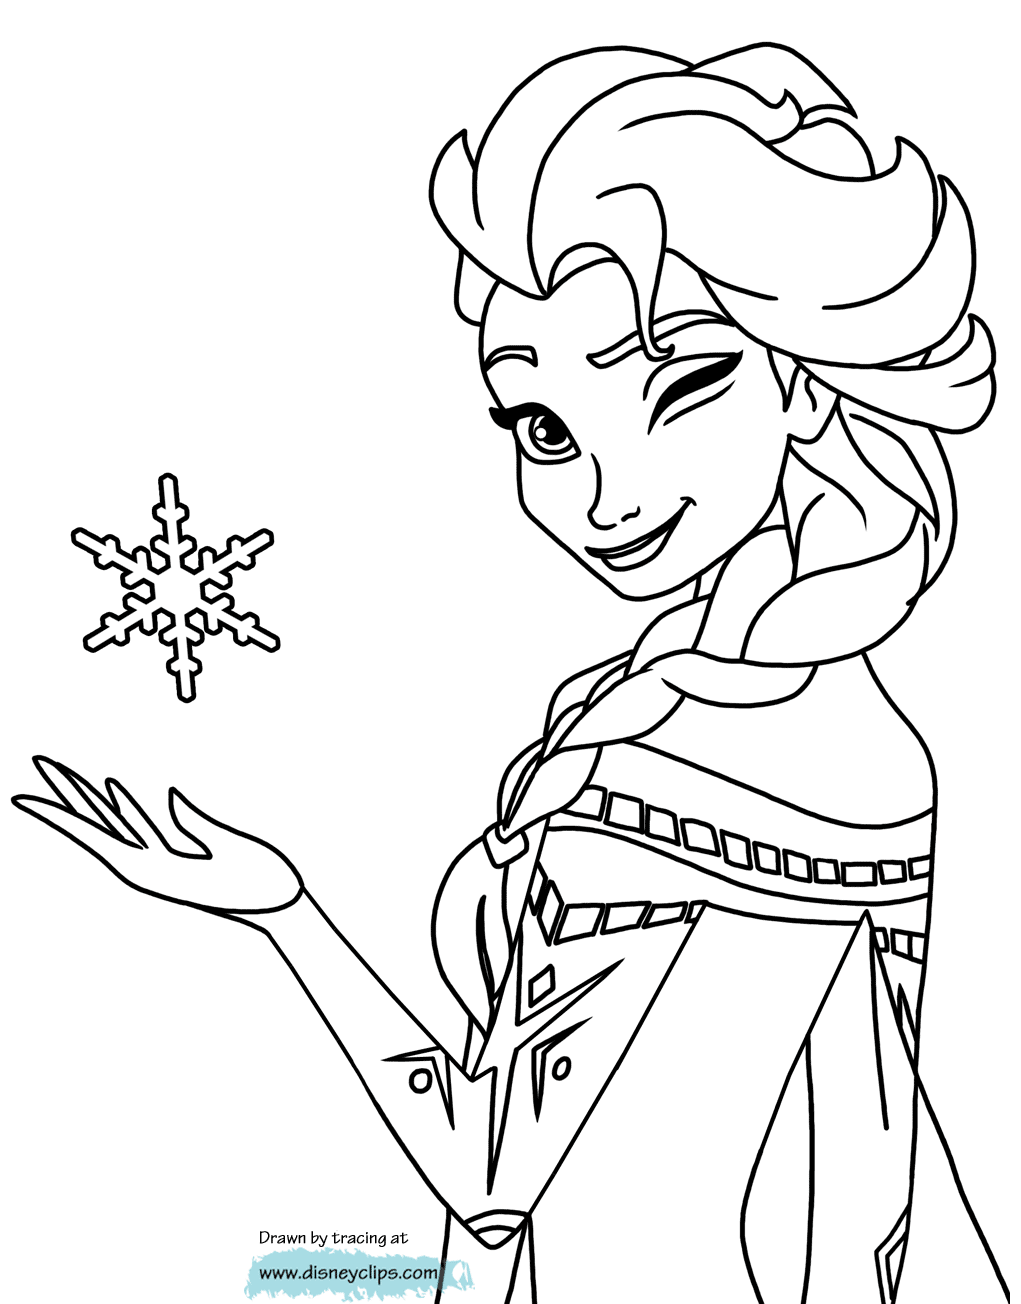 printable coloring pages of elsa from frozen frozen elsa and anna coloring pages getcoloringpagescom elsa frozen from pages of coloring printable 